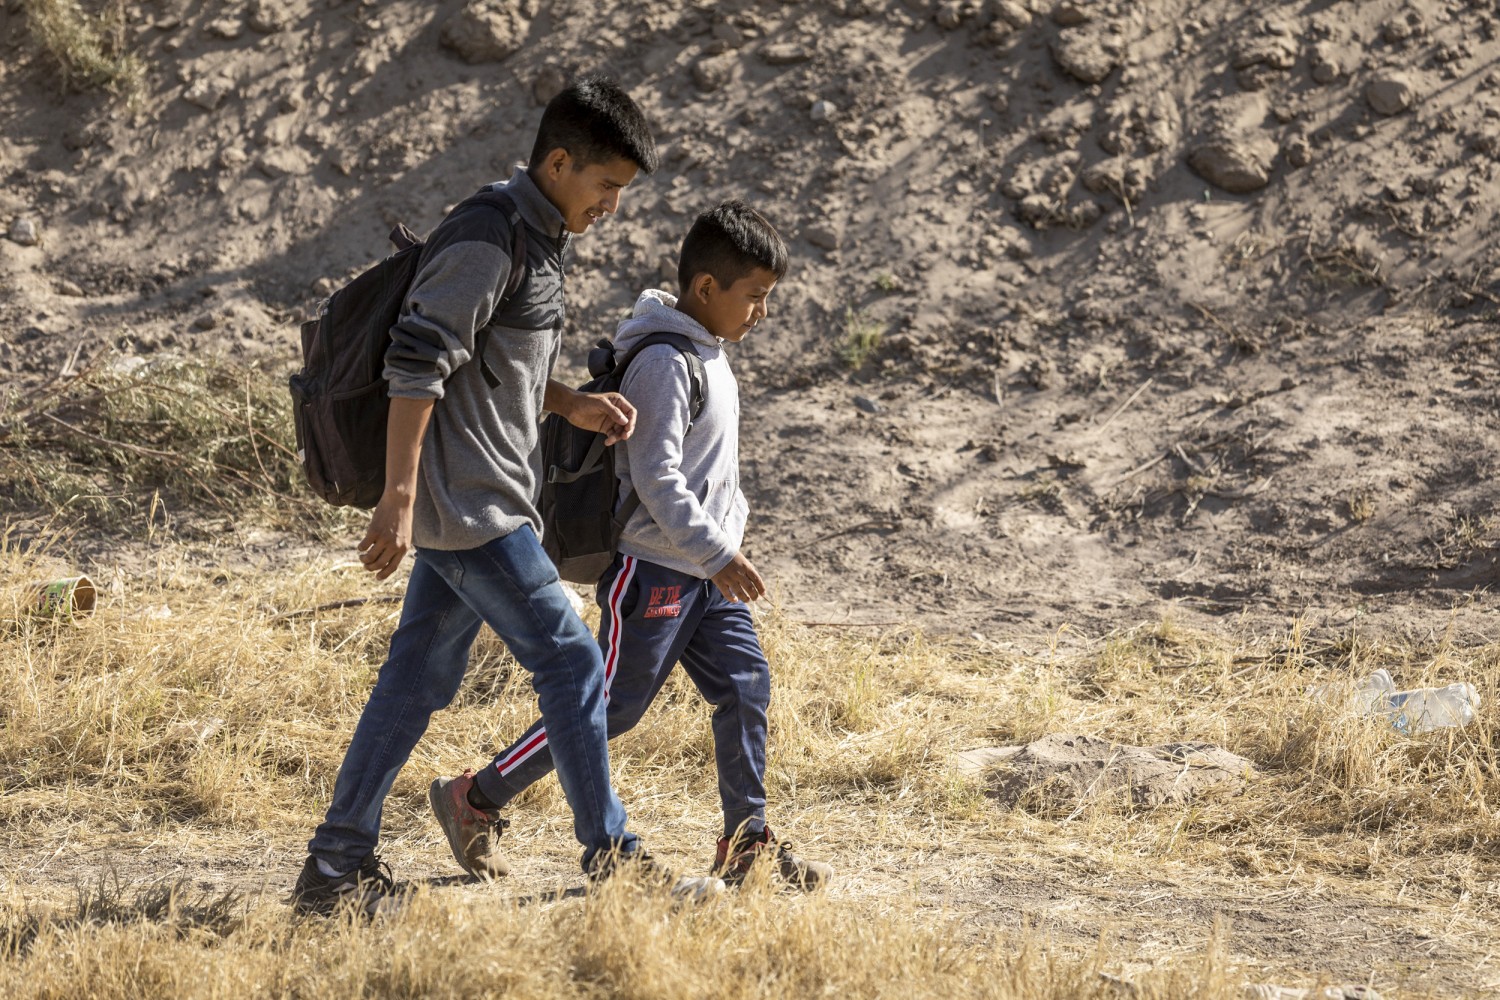 Migrant crossings at the US-Mexico border are down. What's behind the drop?